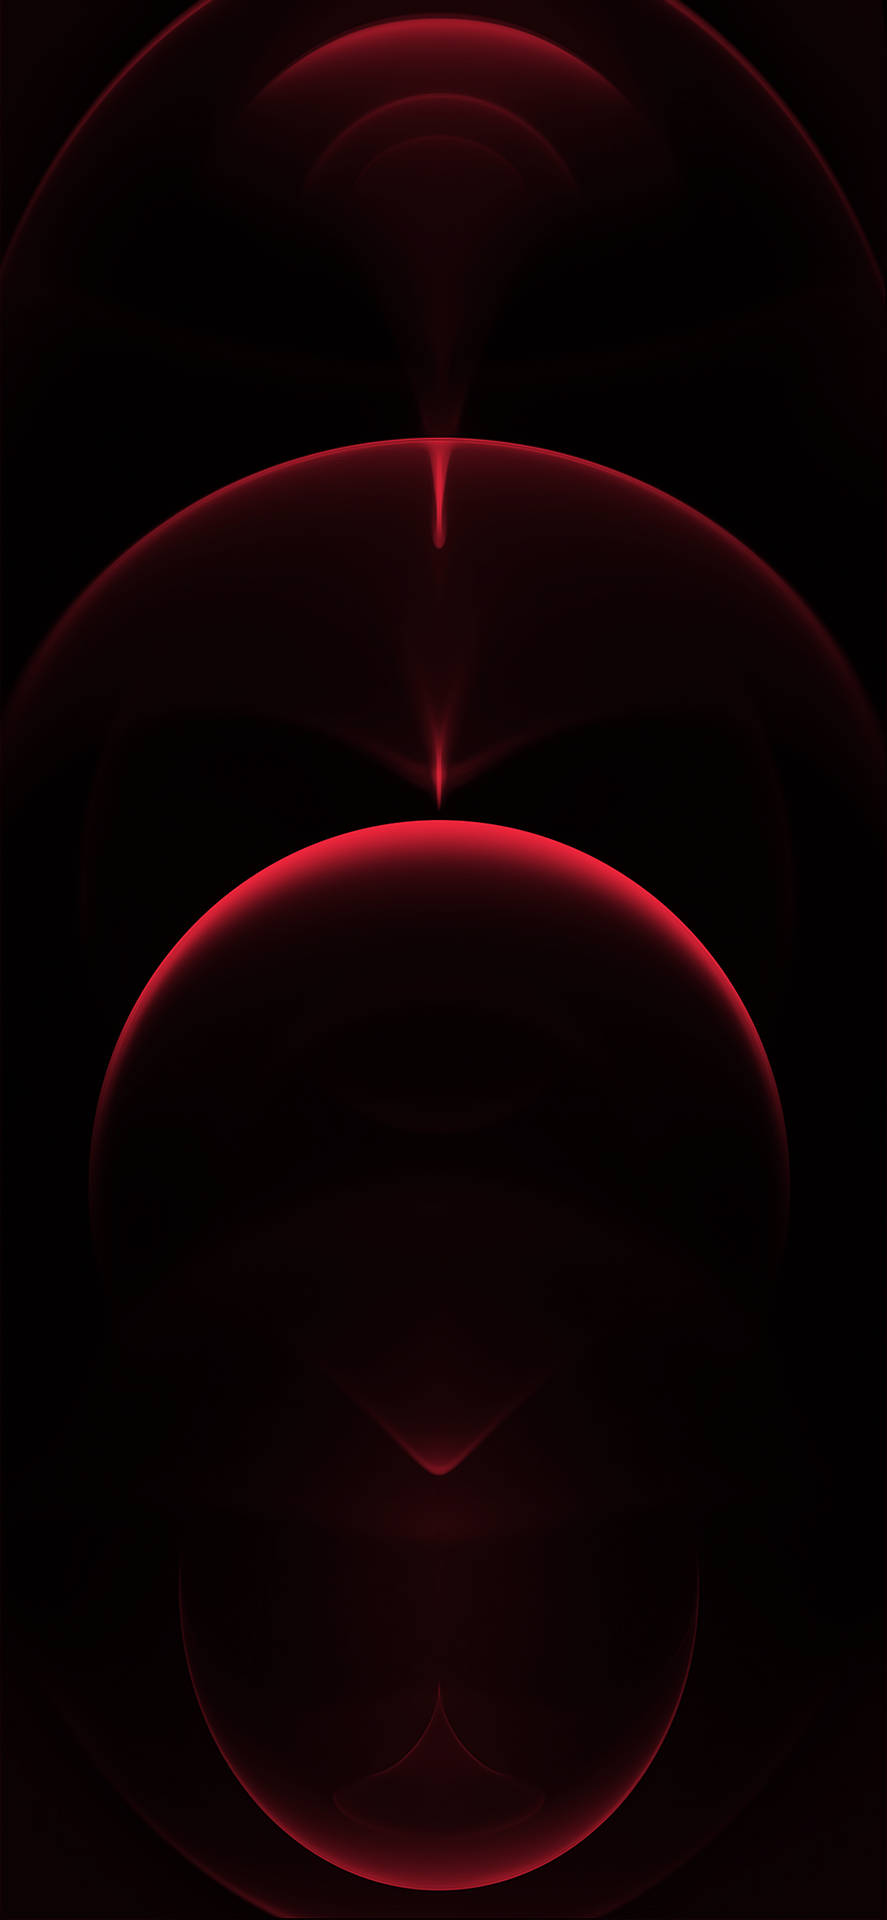 Faded Pure Red Circles Background